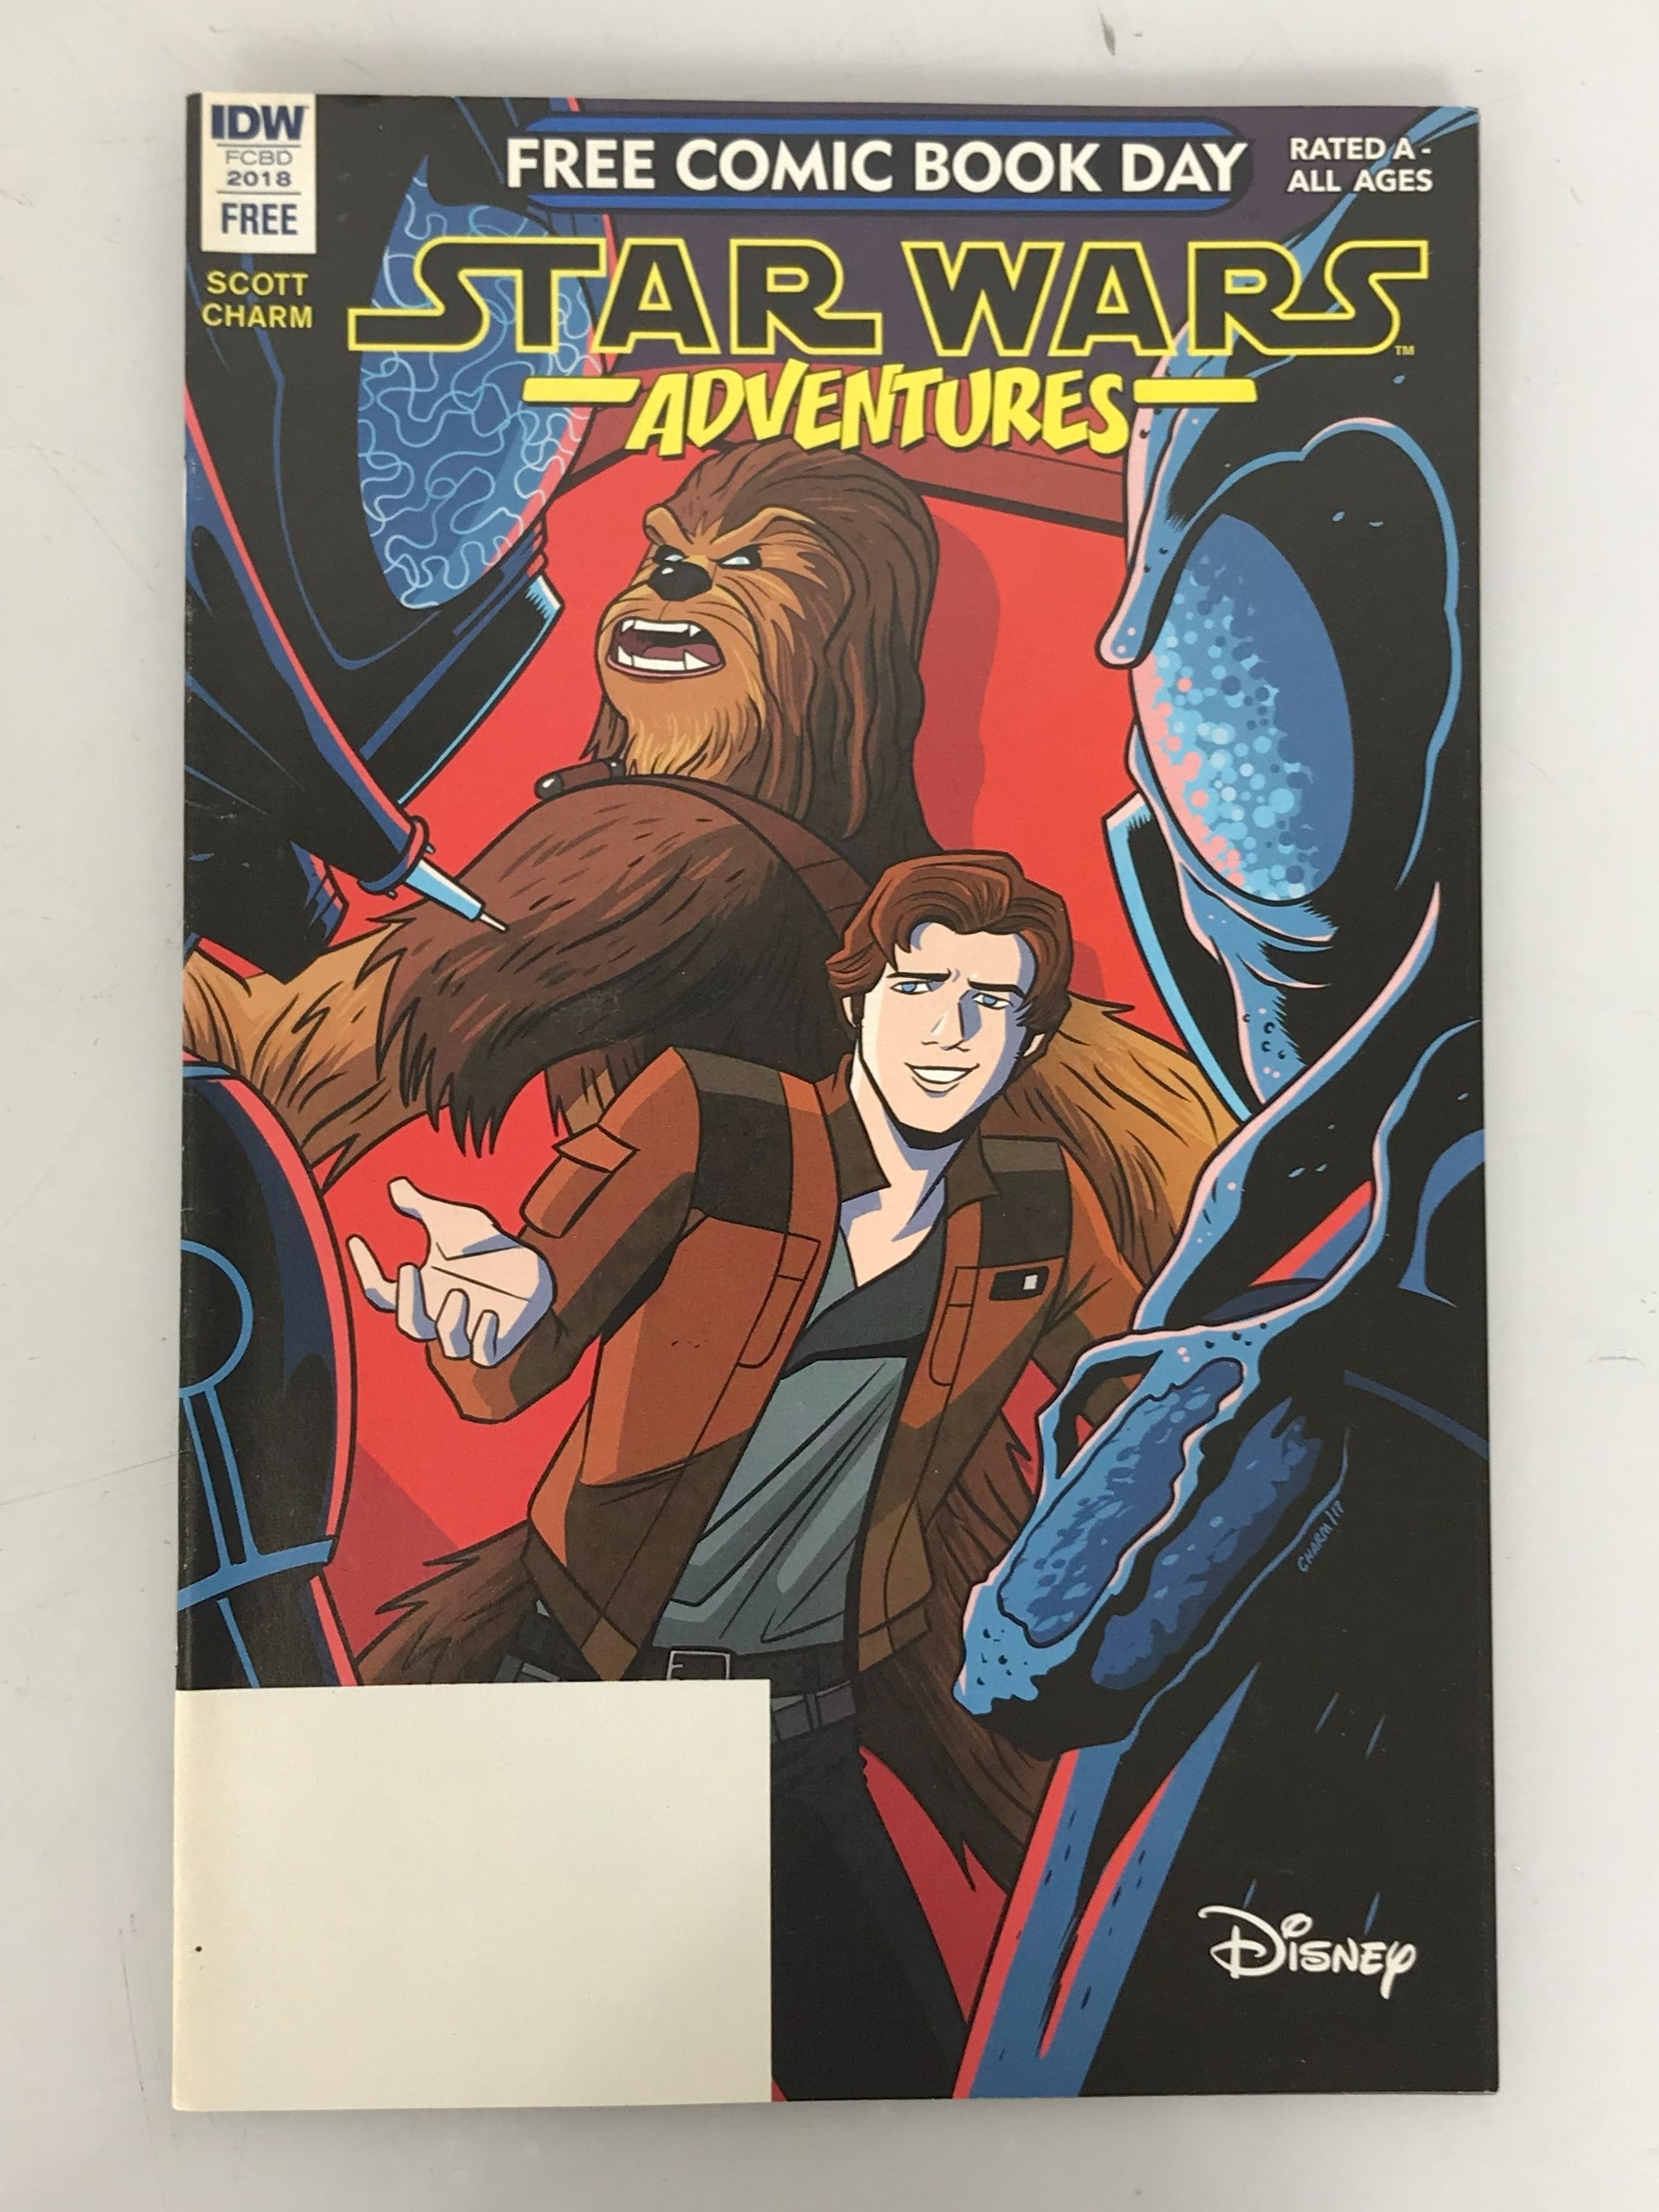 Star Wars Adventures Free Comic Book Day 2018